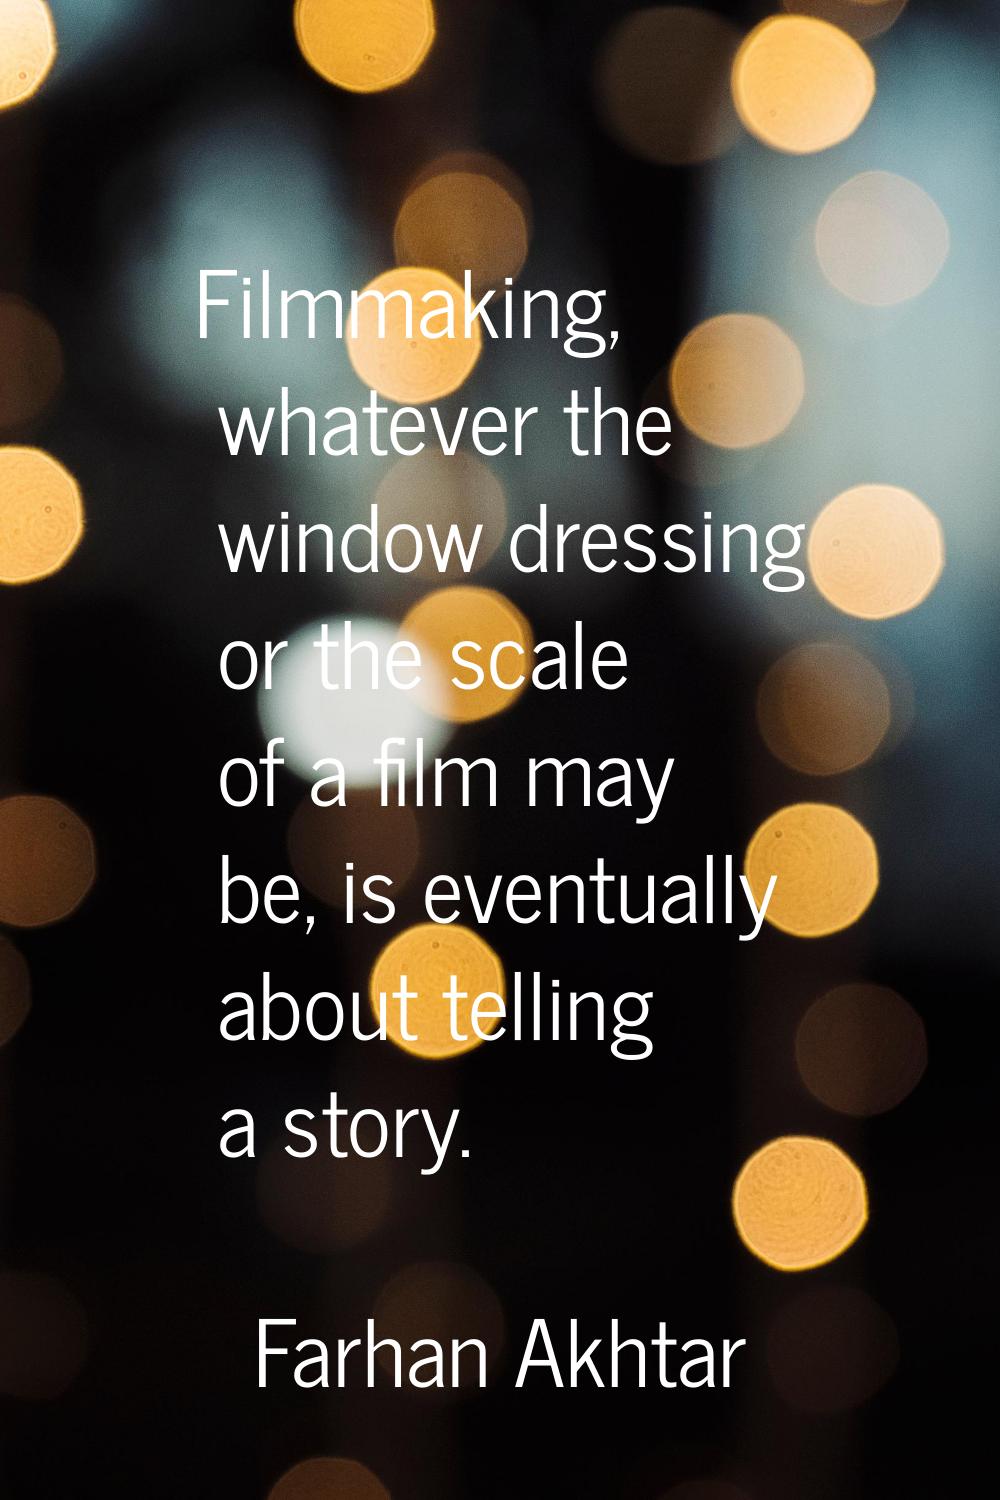 Filmmaking, whatever the window dressing or the scale of a film may be, is eventually about telling